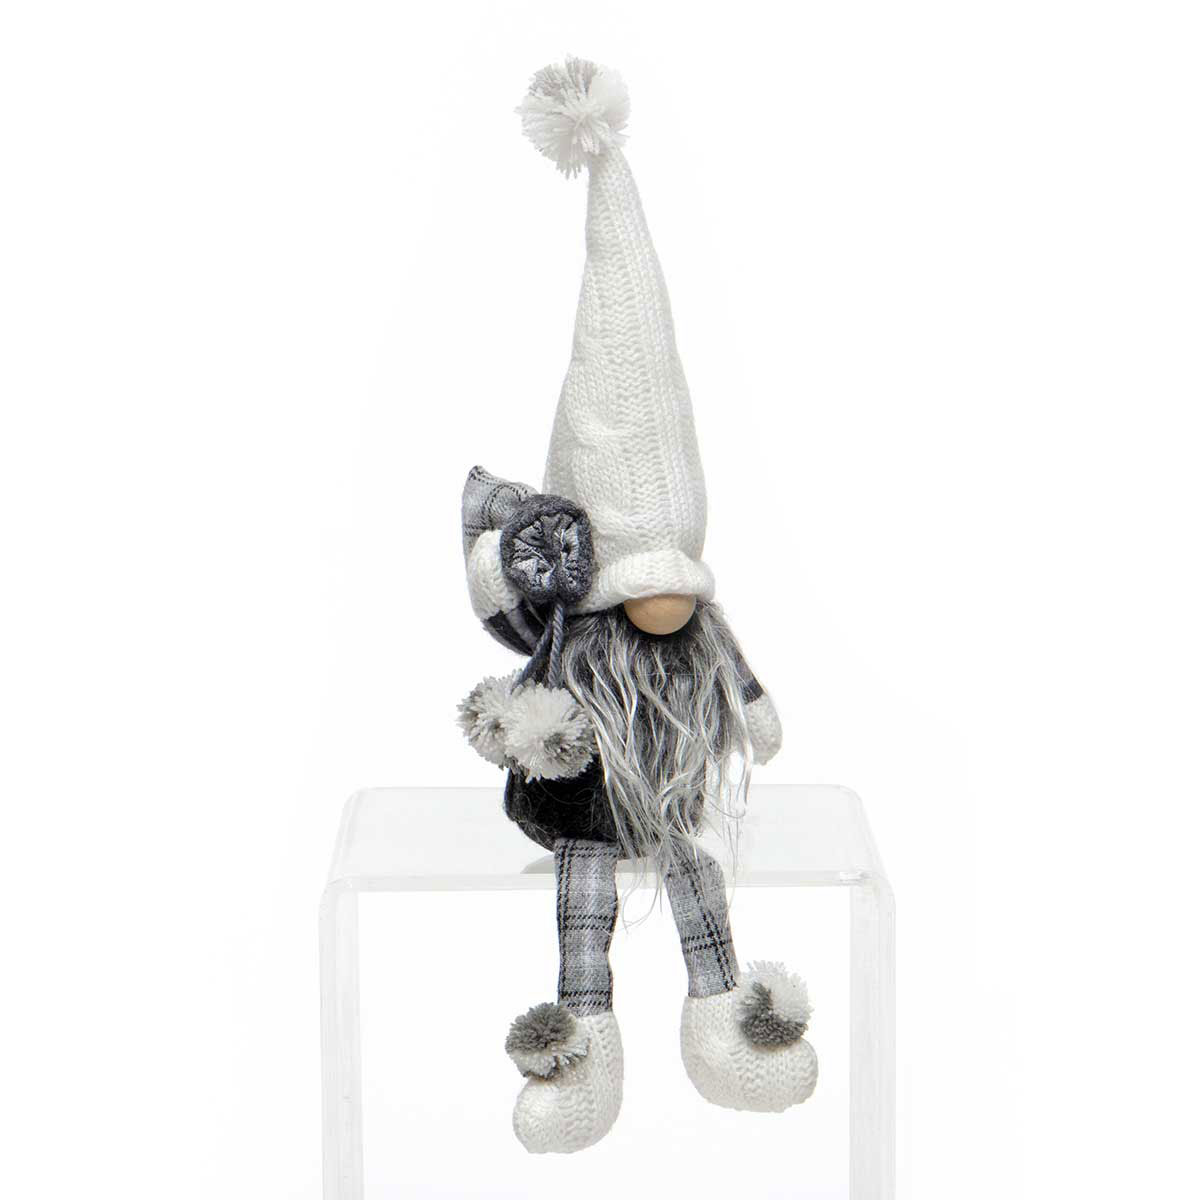 !POM-POM GNOME GREY/CREAM WITH PLAID BAG, WIRED CABLE KNIT f33